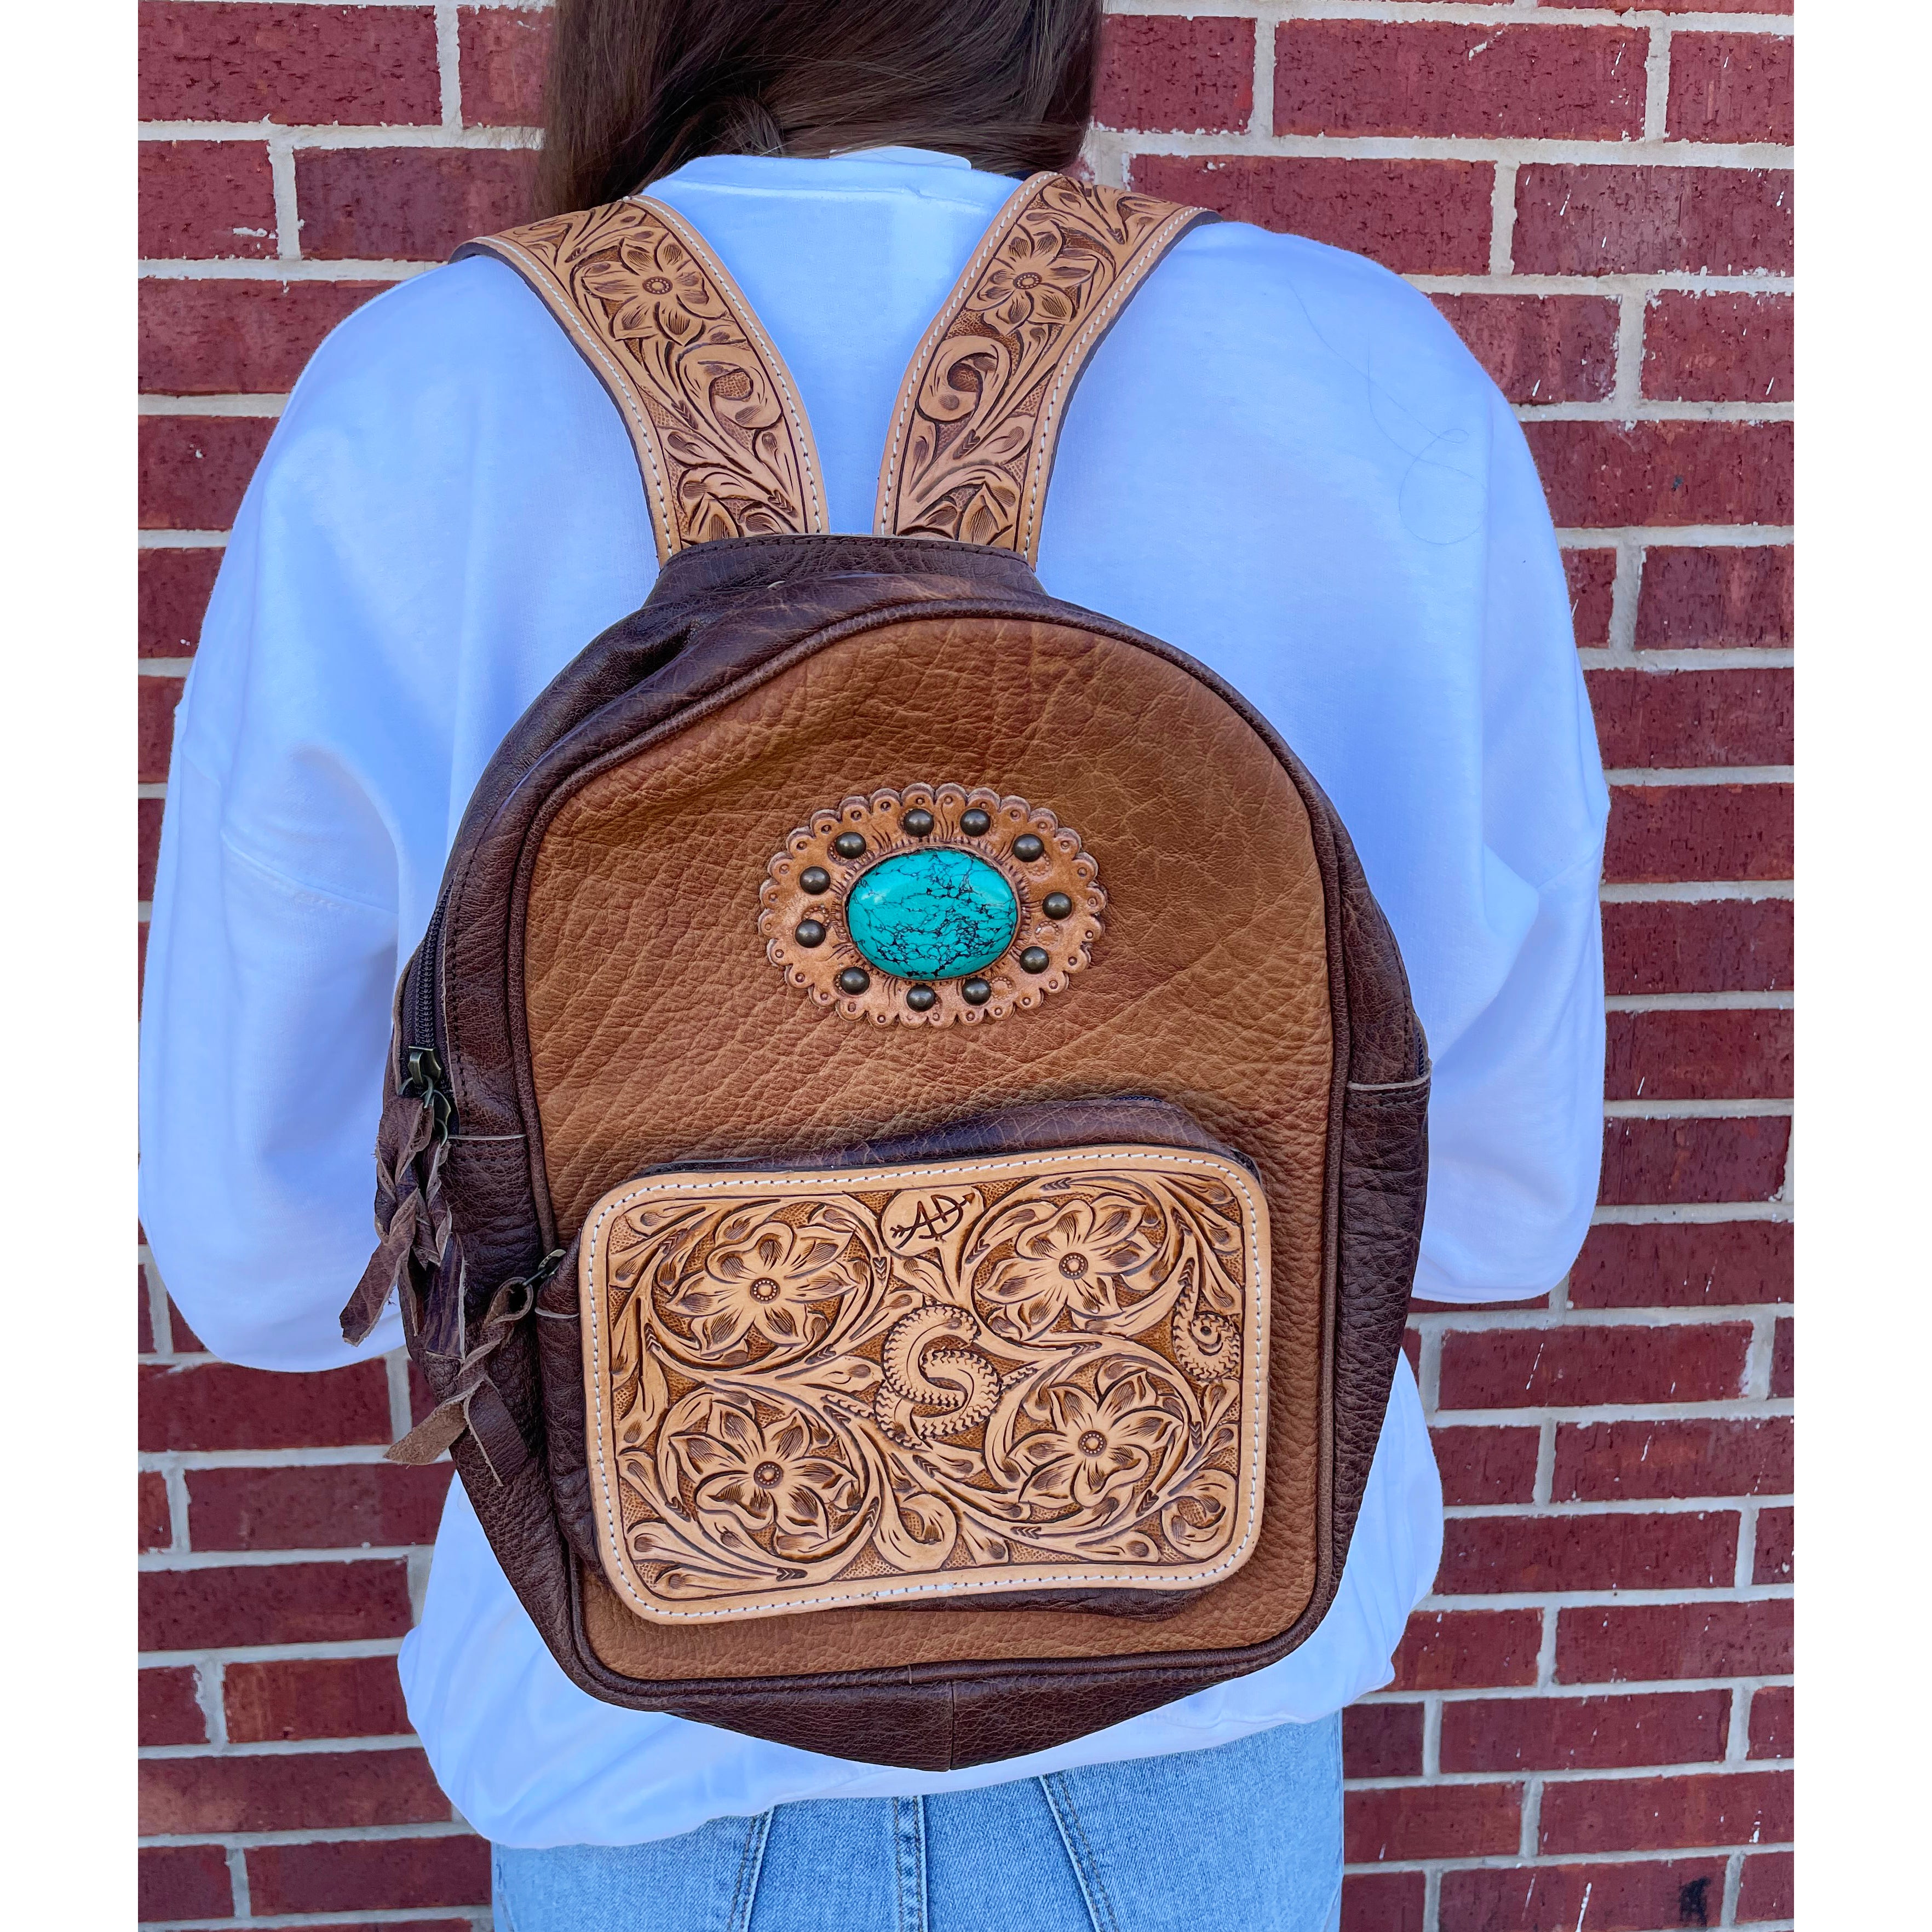 American Darling Turquoise Stone Purse